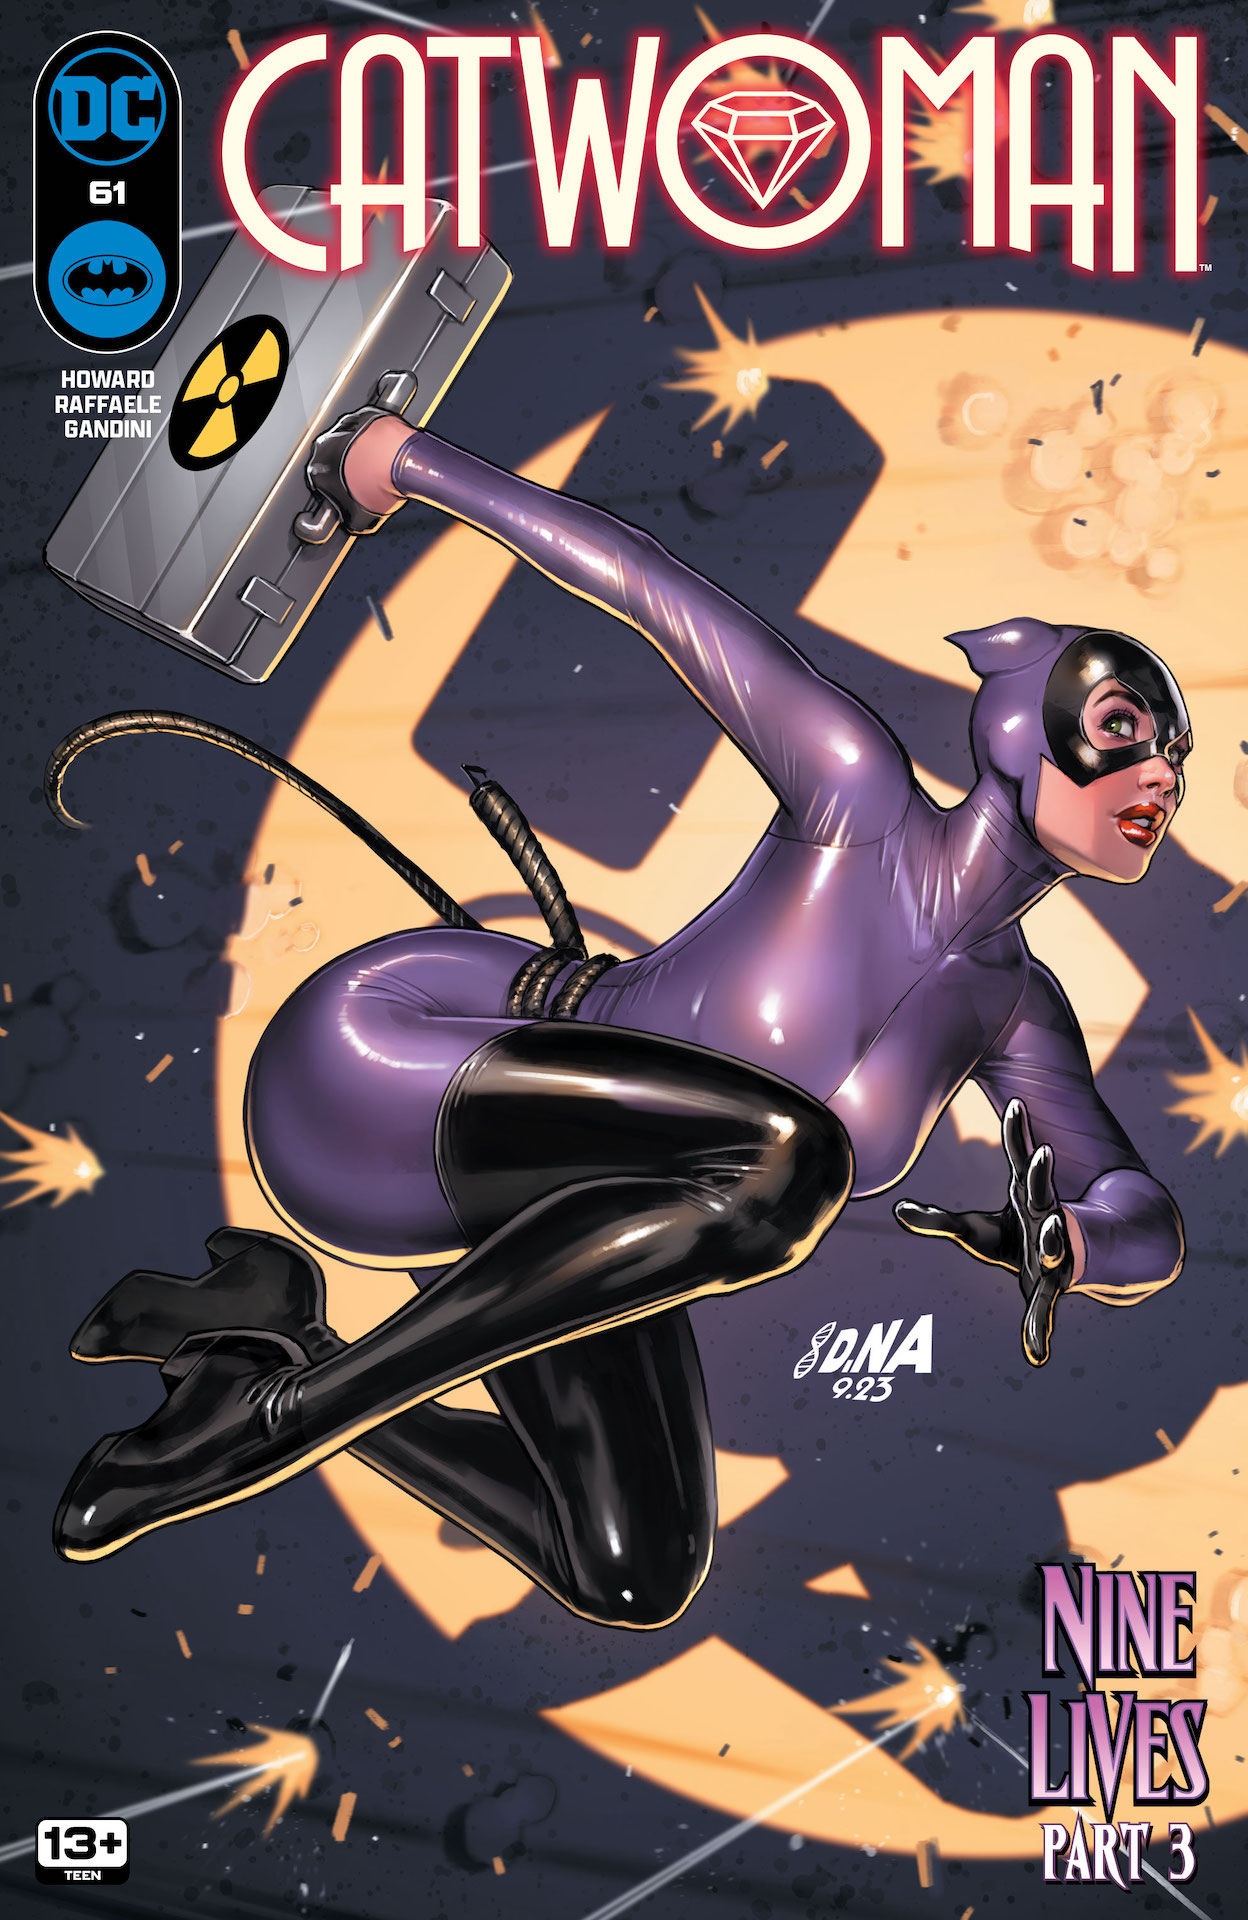 DC Preview: Catwoman #61